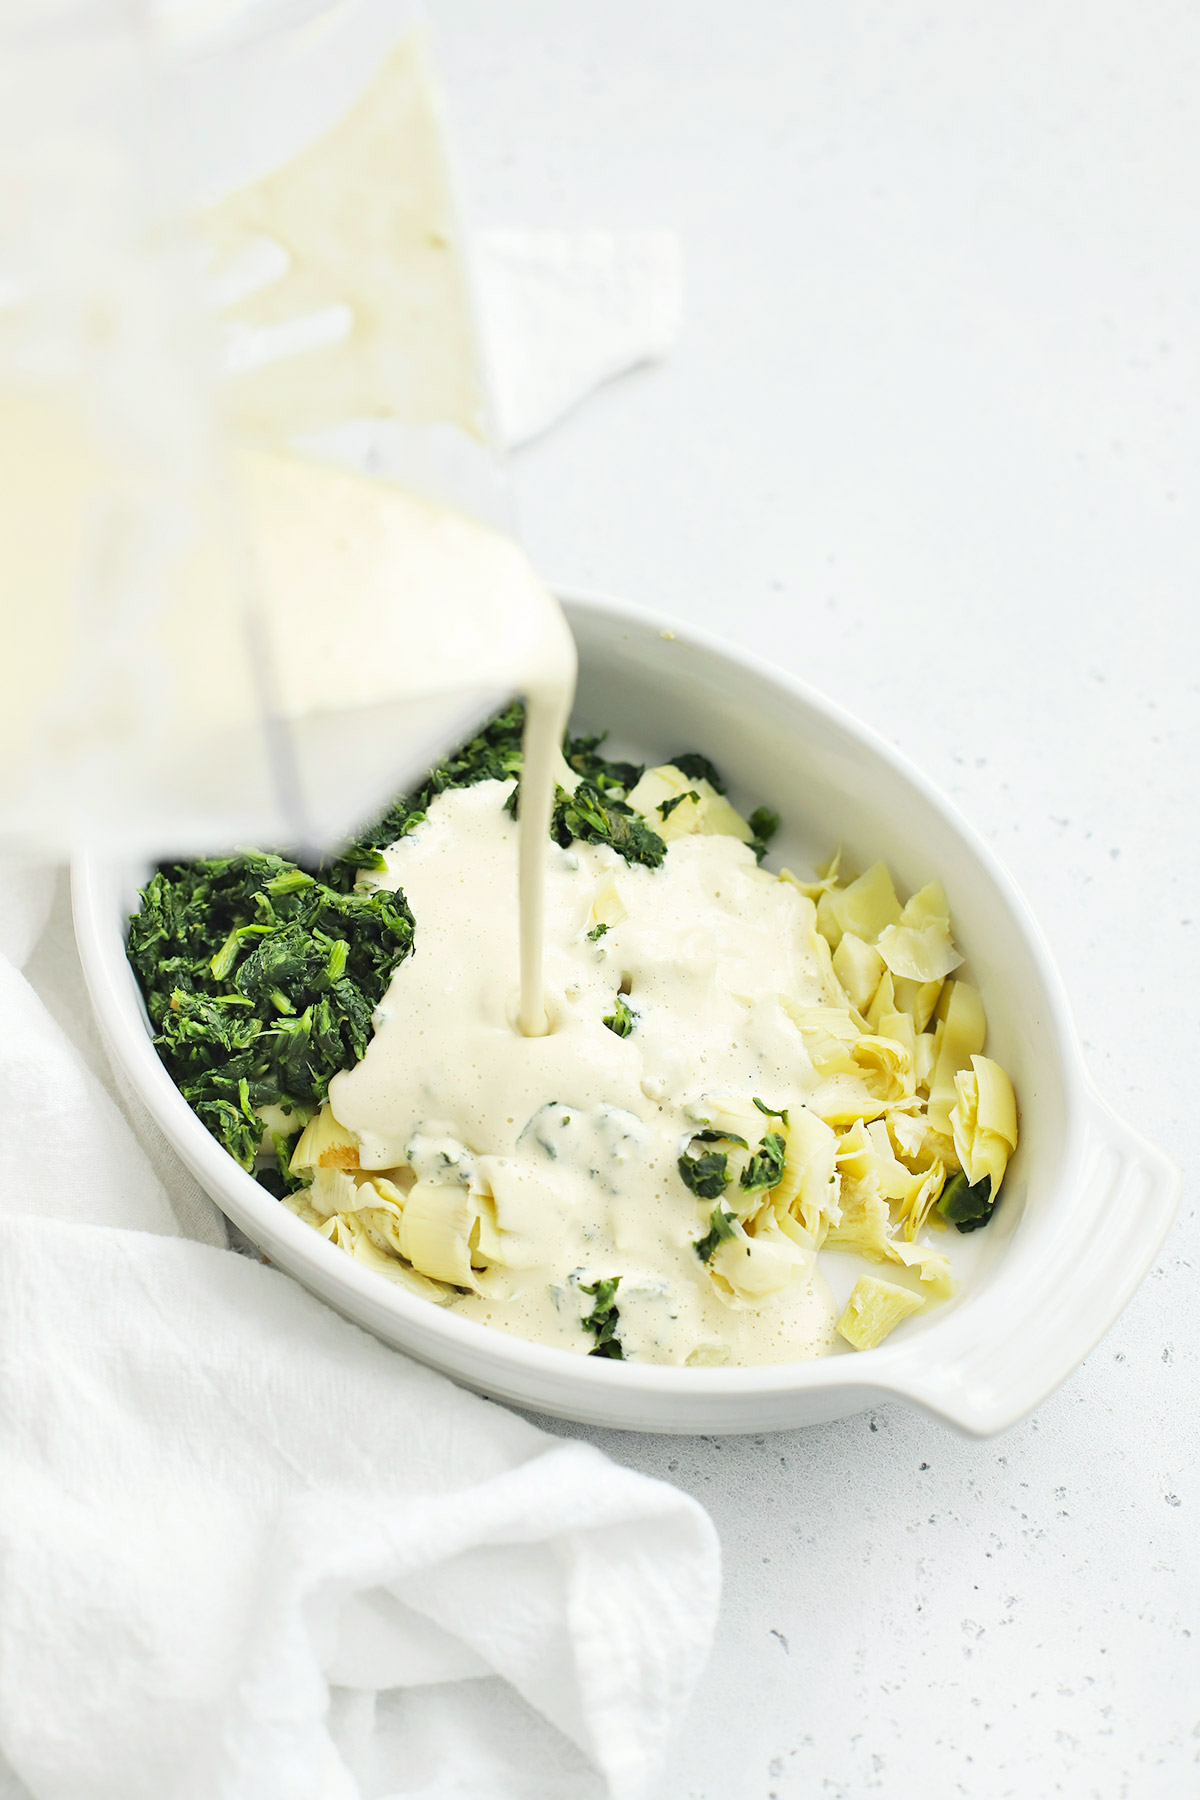 Pouring creamy cashew sauce over spinach and artichokes to make vegan spinach artichoke dip